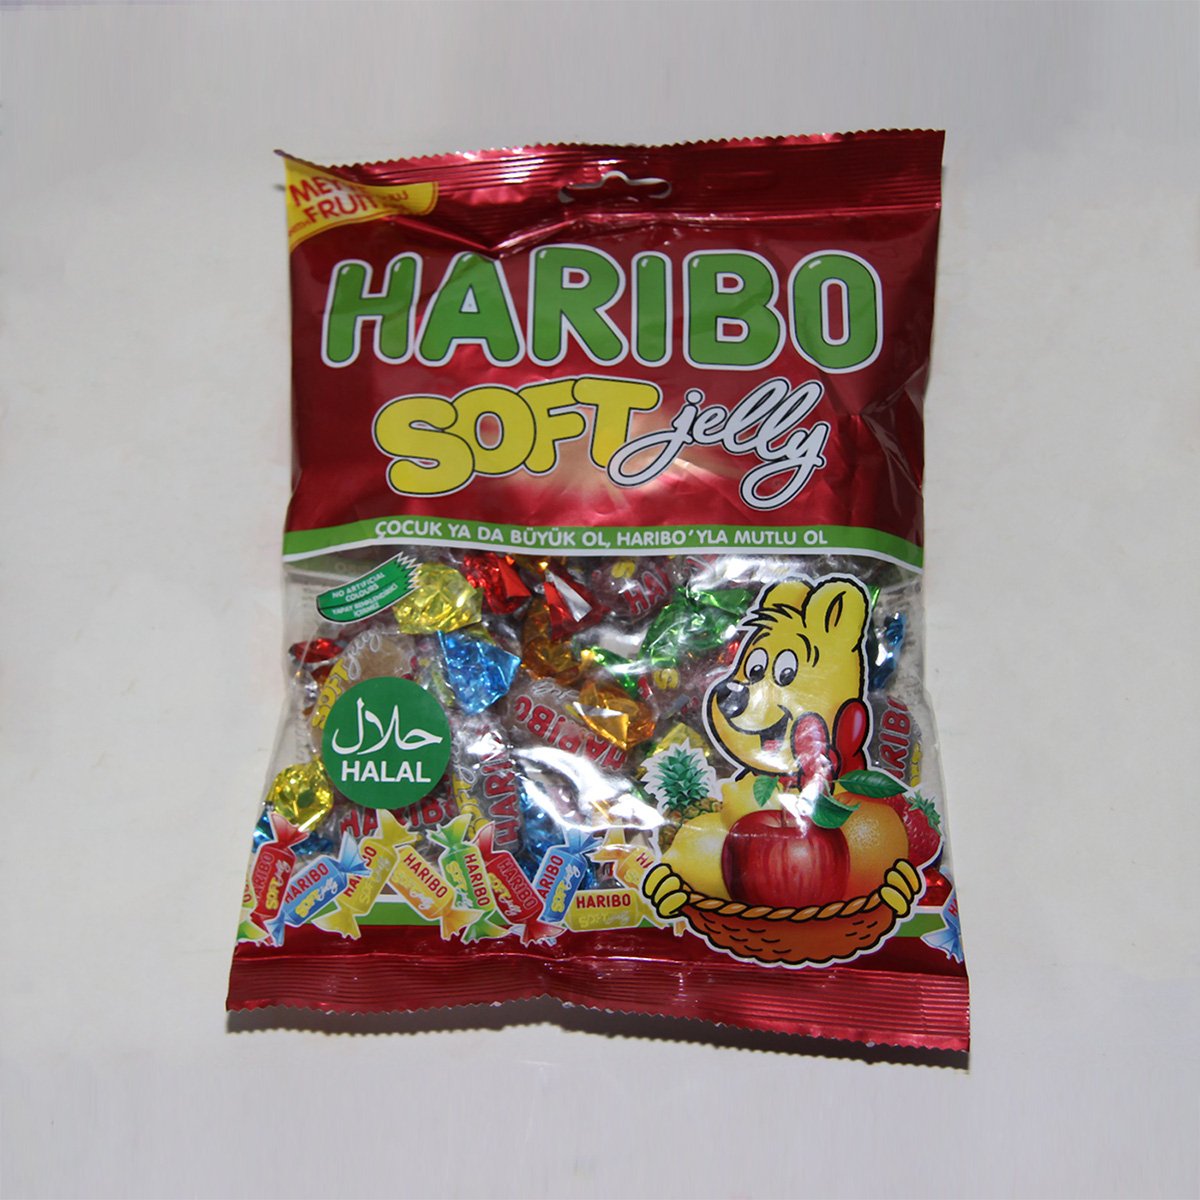 a pack of Haribo soft jelly